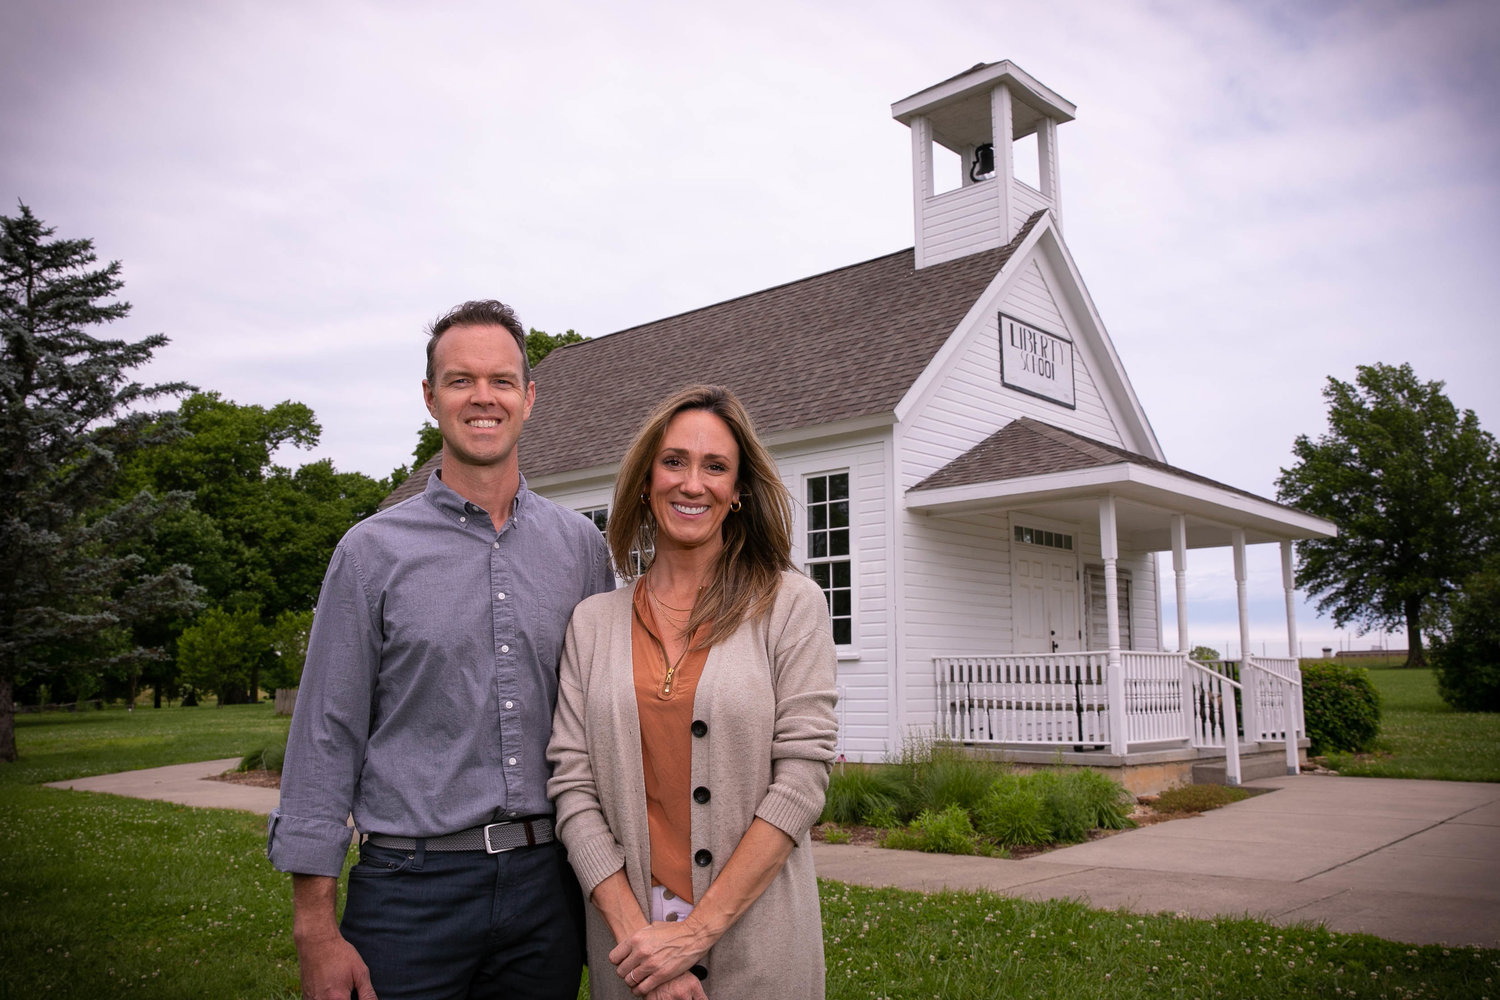 Steve and Katy Kelly plan to open Capstone Academy in the fall and are looking for a site. The mixed-age classrooms harken back to one-room schoolhouses, like the one pictured as the Gray-Campbell Farmstead at Nathanael Greene Park.